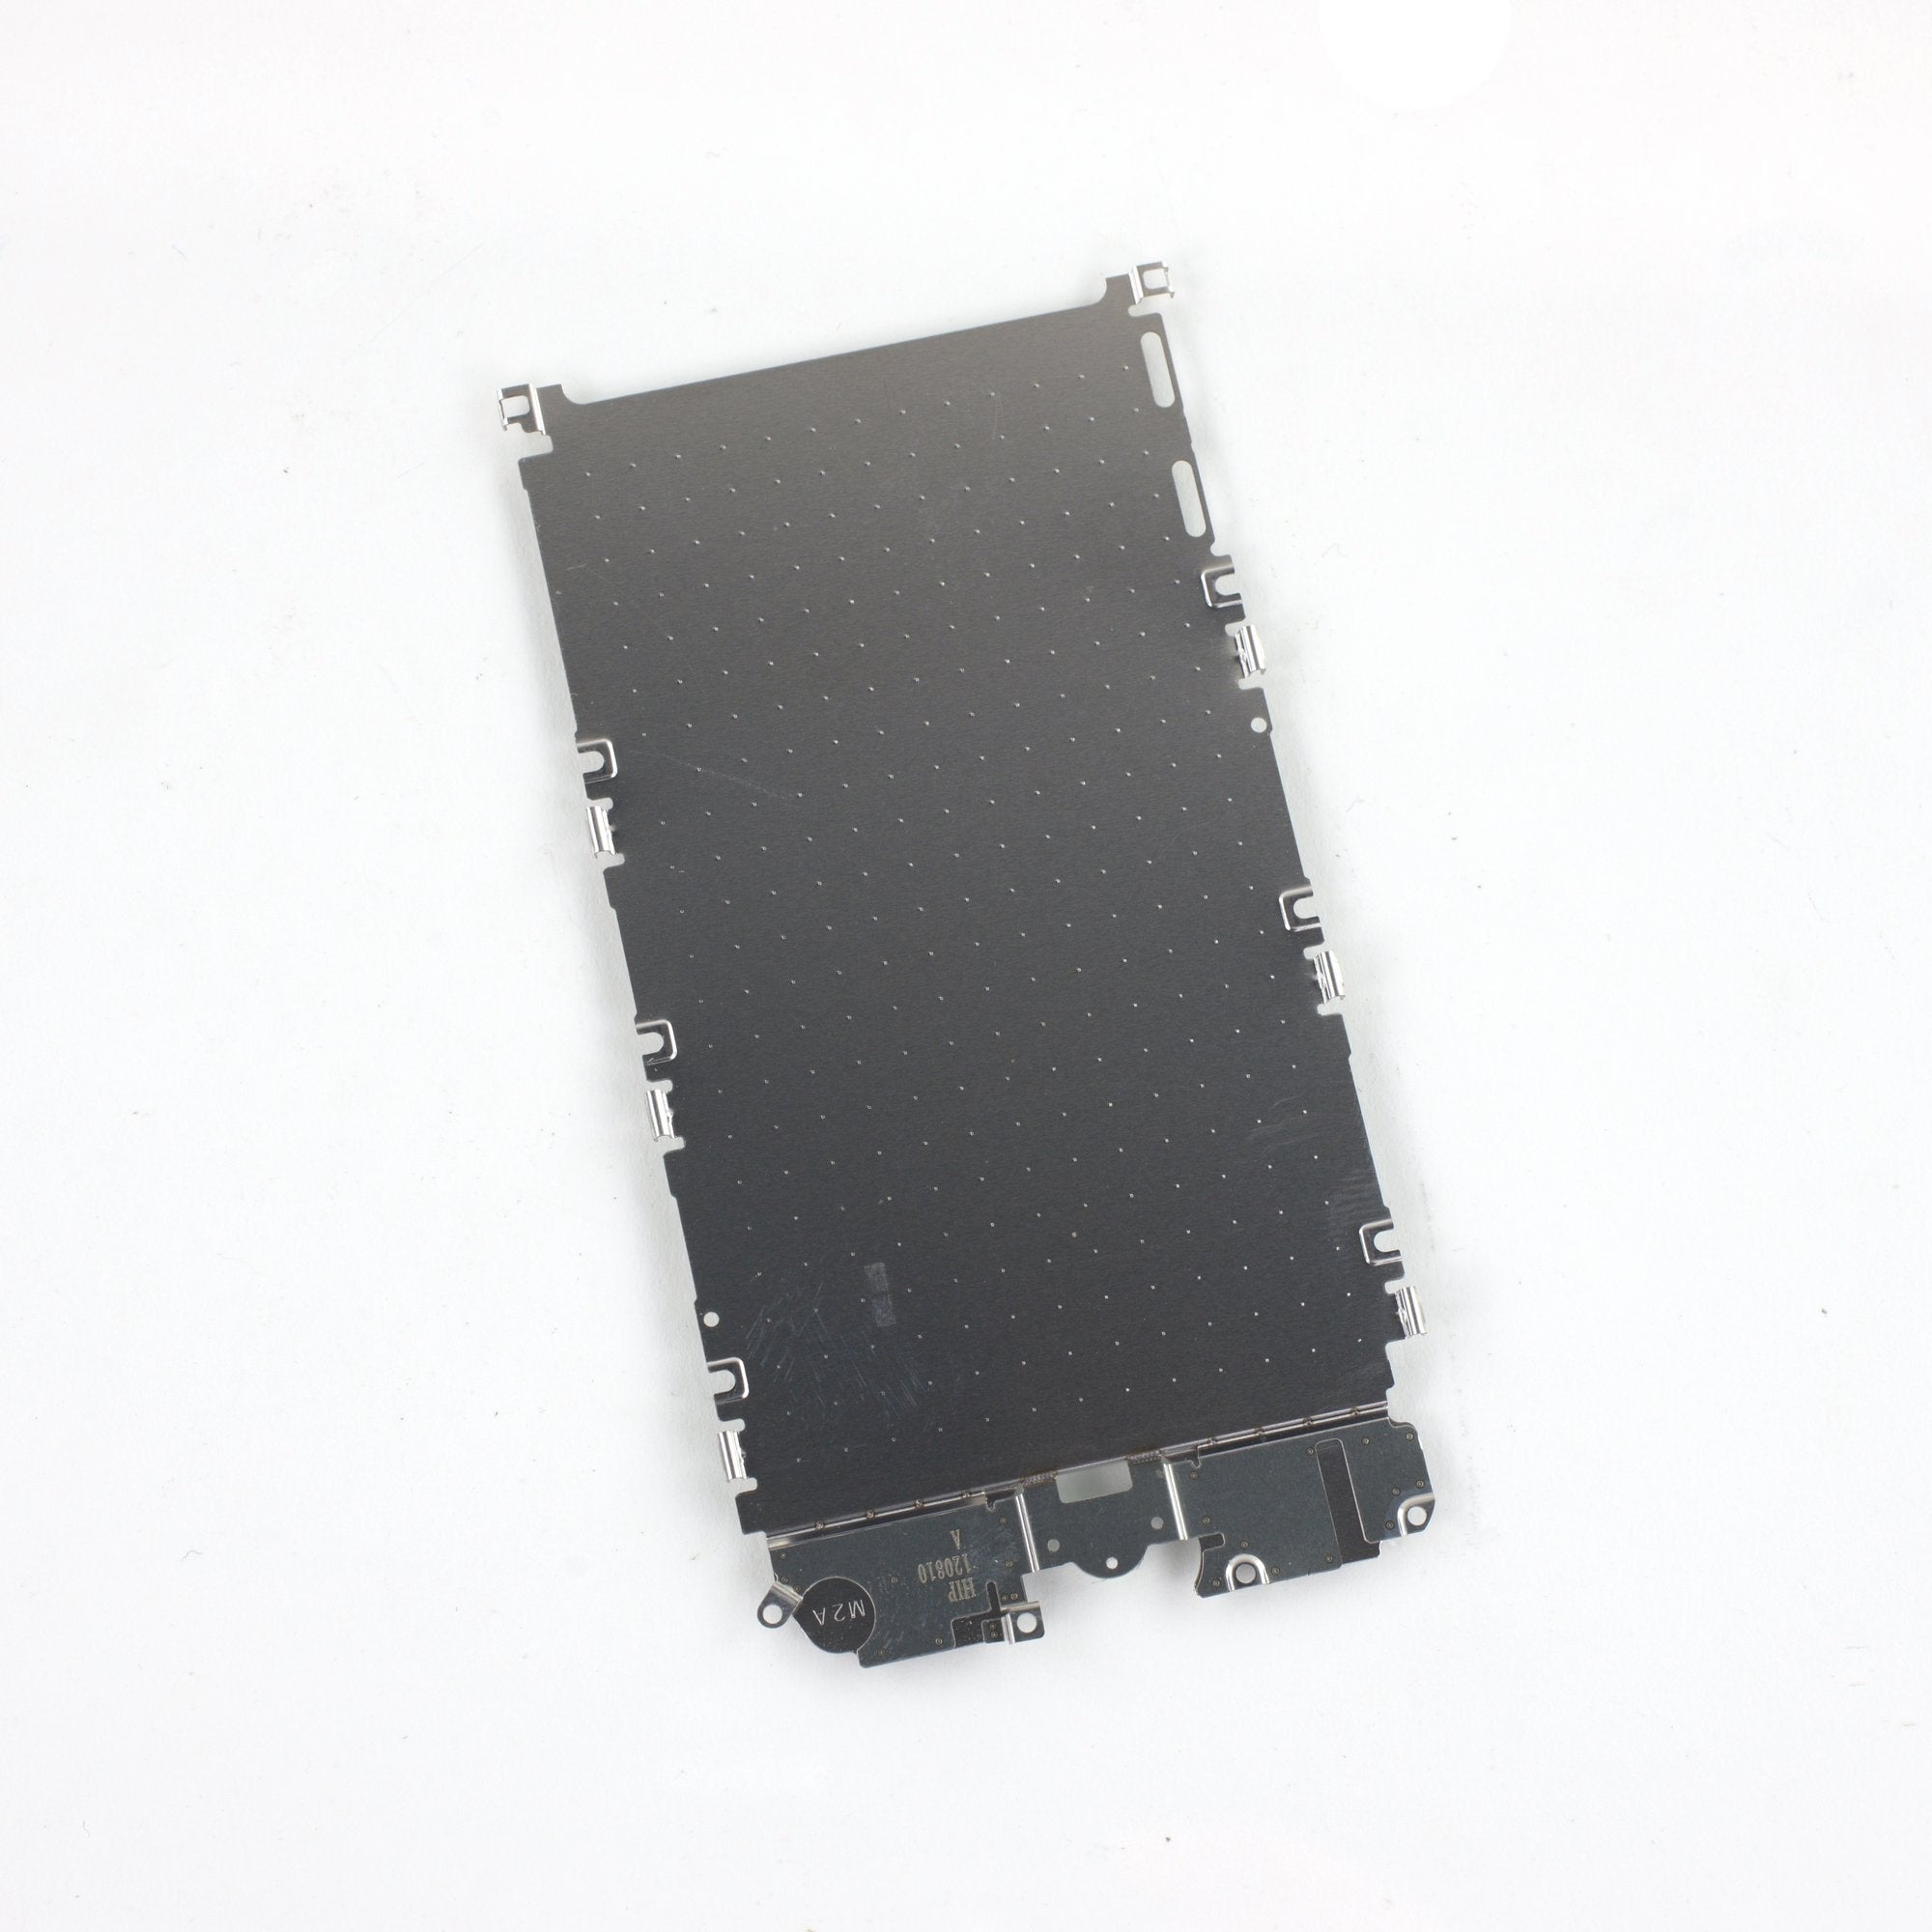 iPod touch (5th Gen) LCD Shield Plate